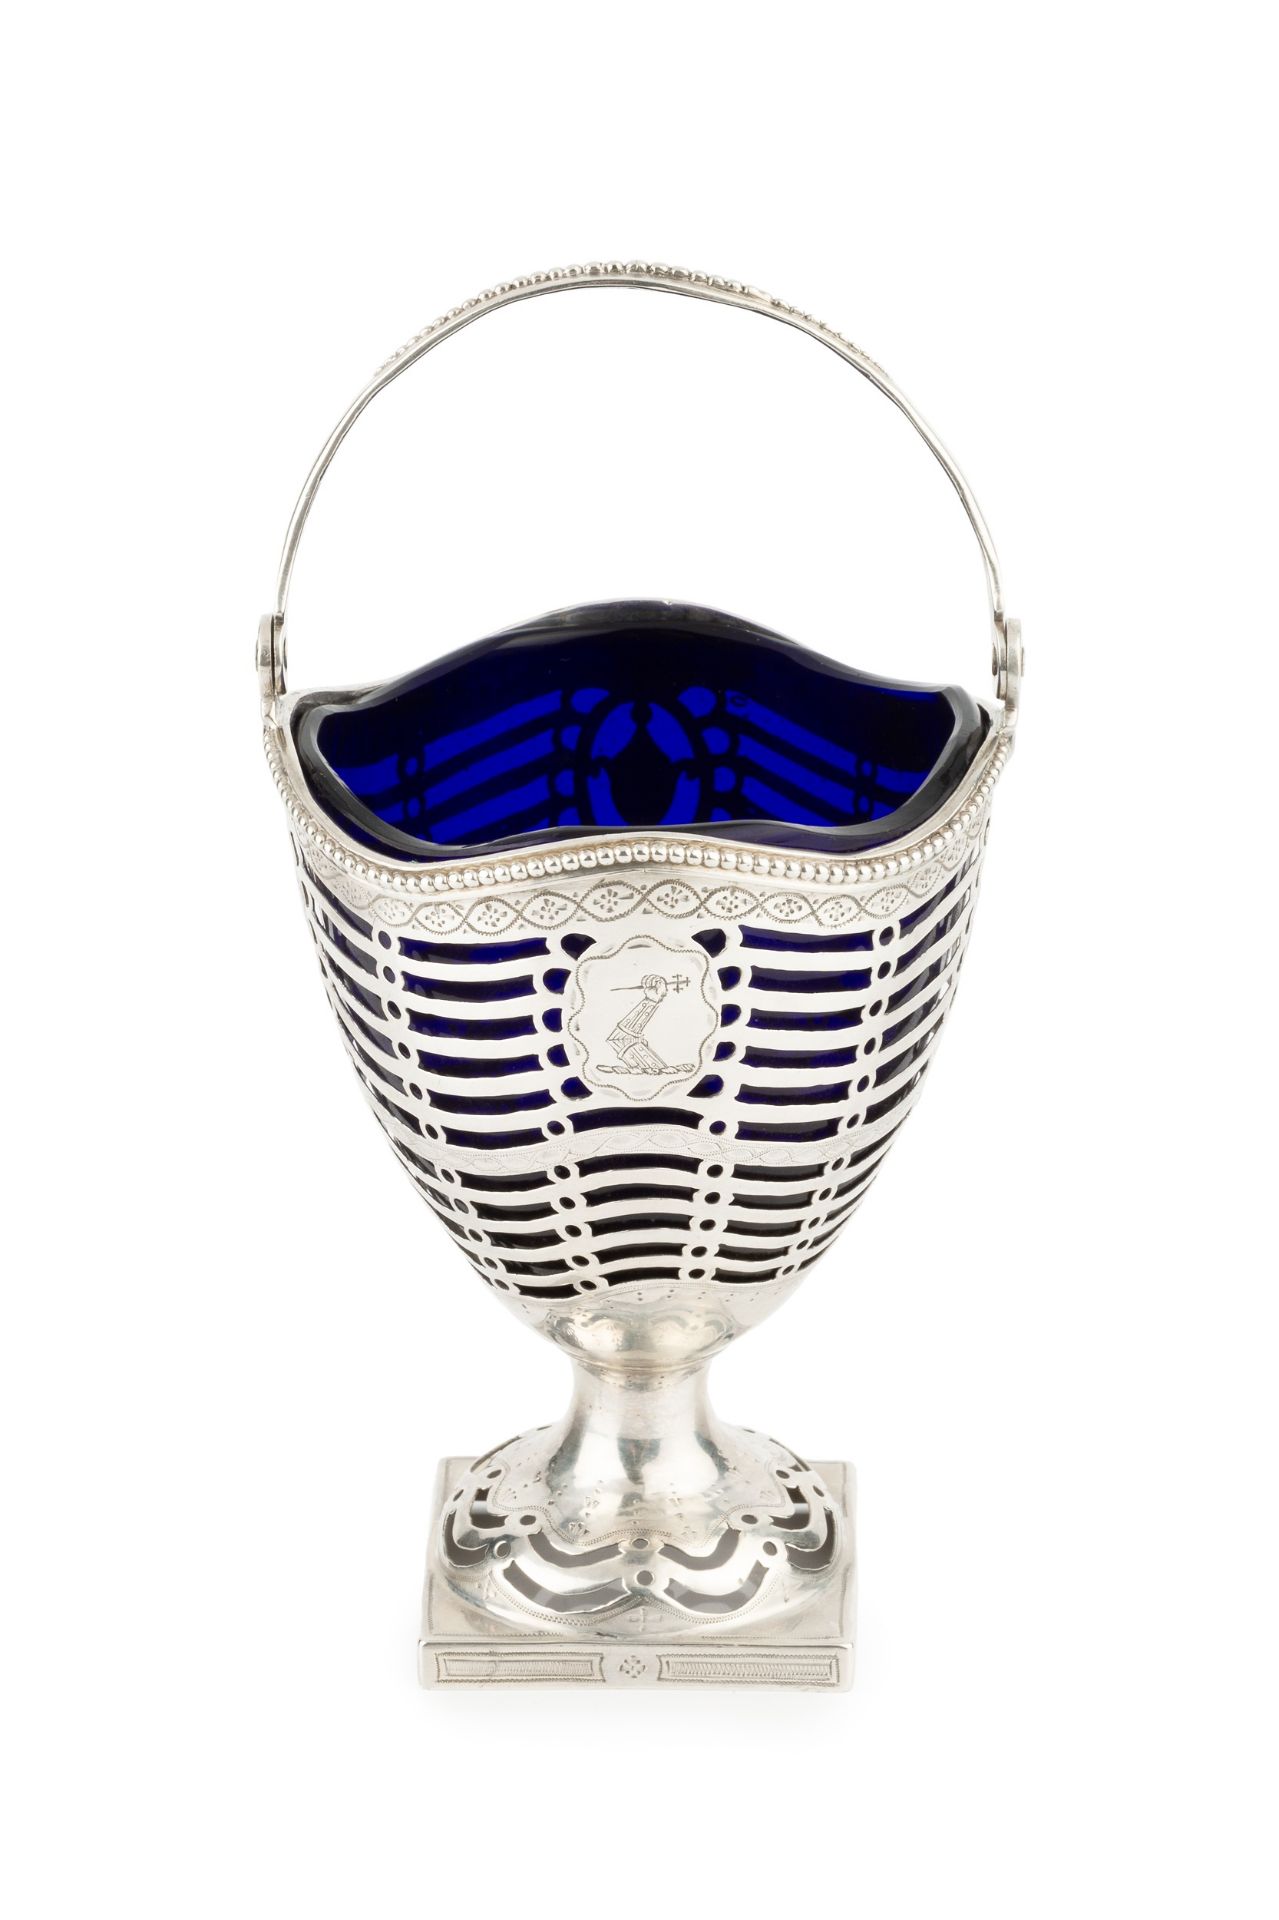 A George III silver swing handled sugar basket, with beaded border, pierce-decorated with